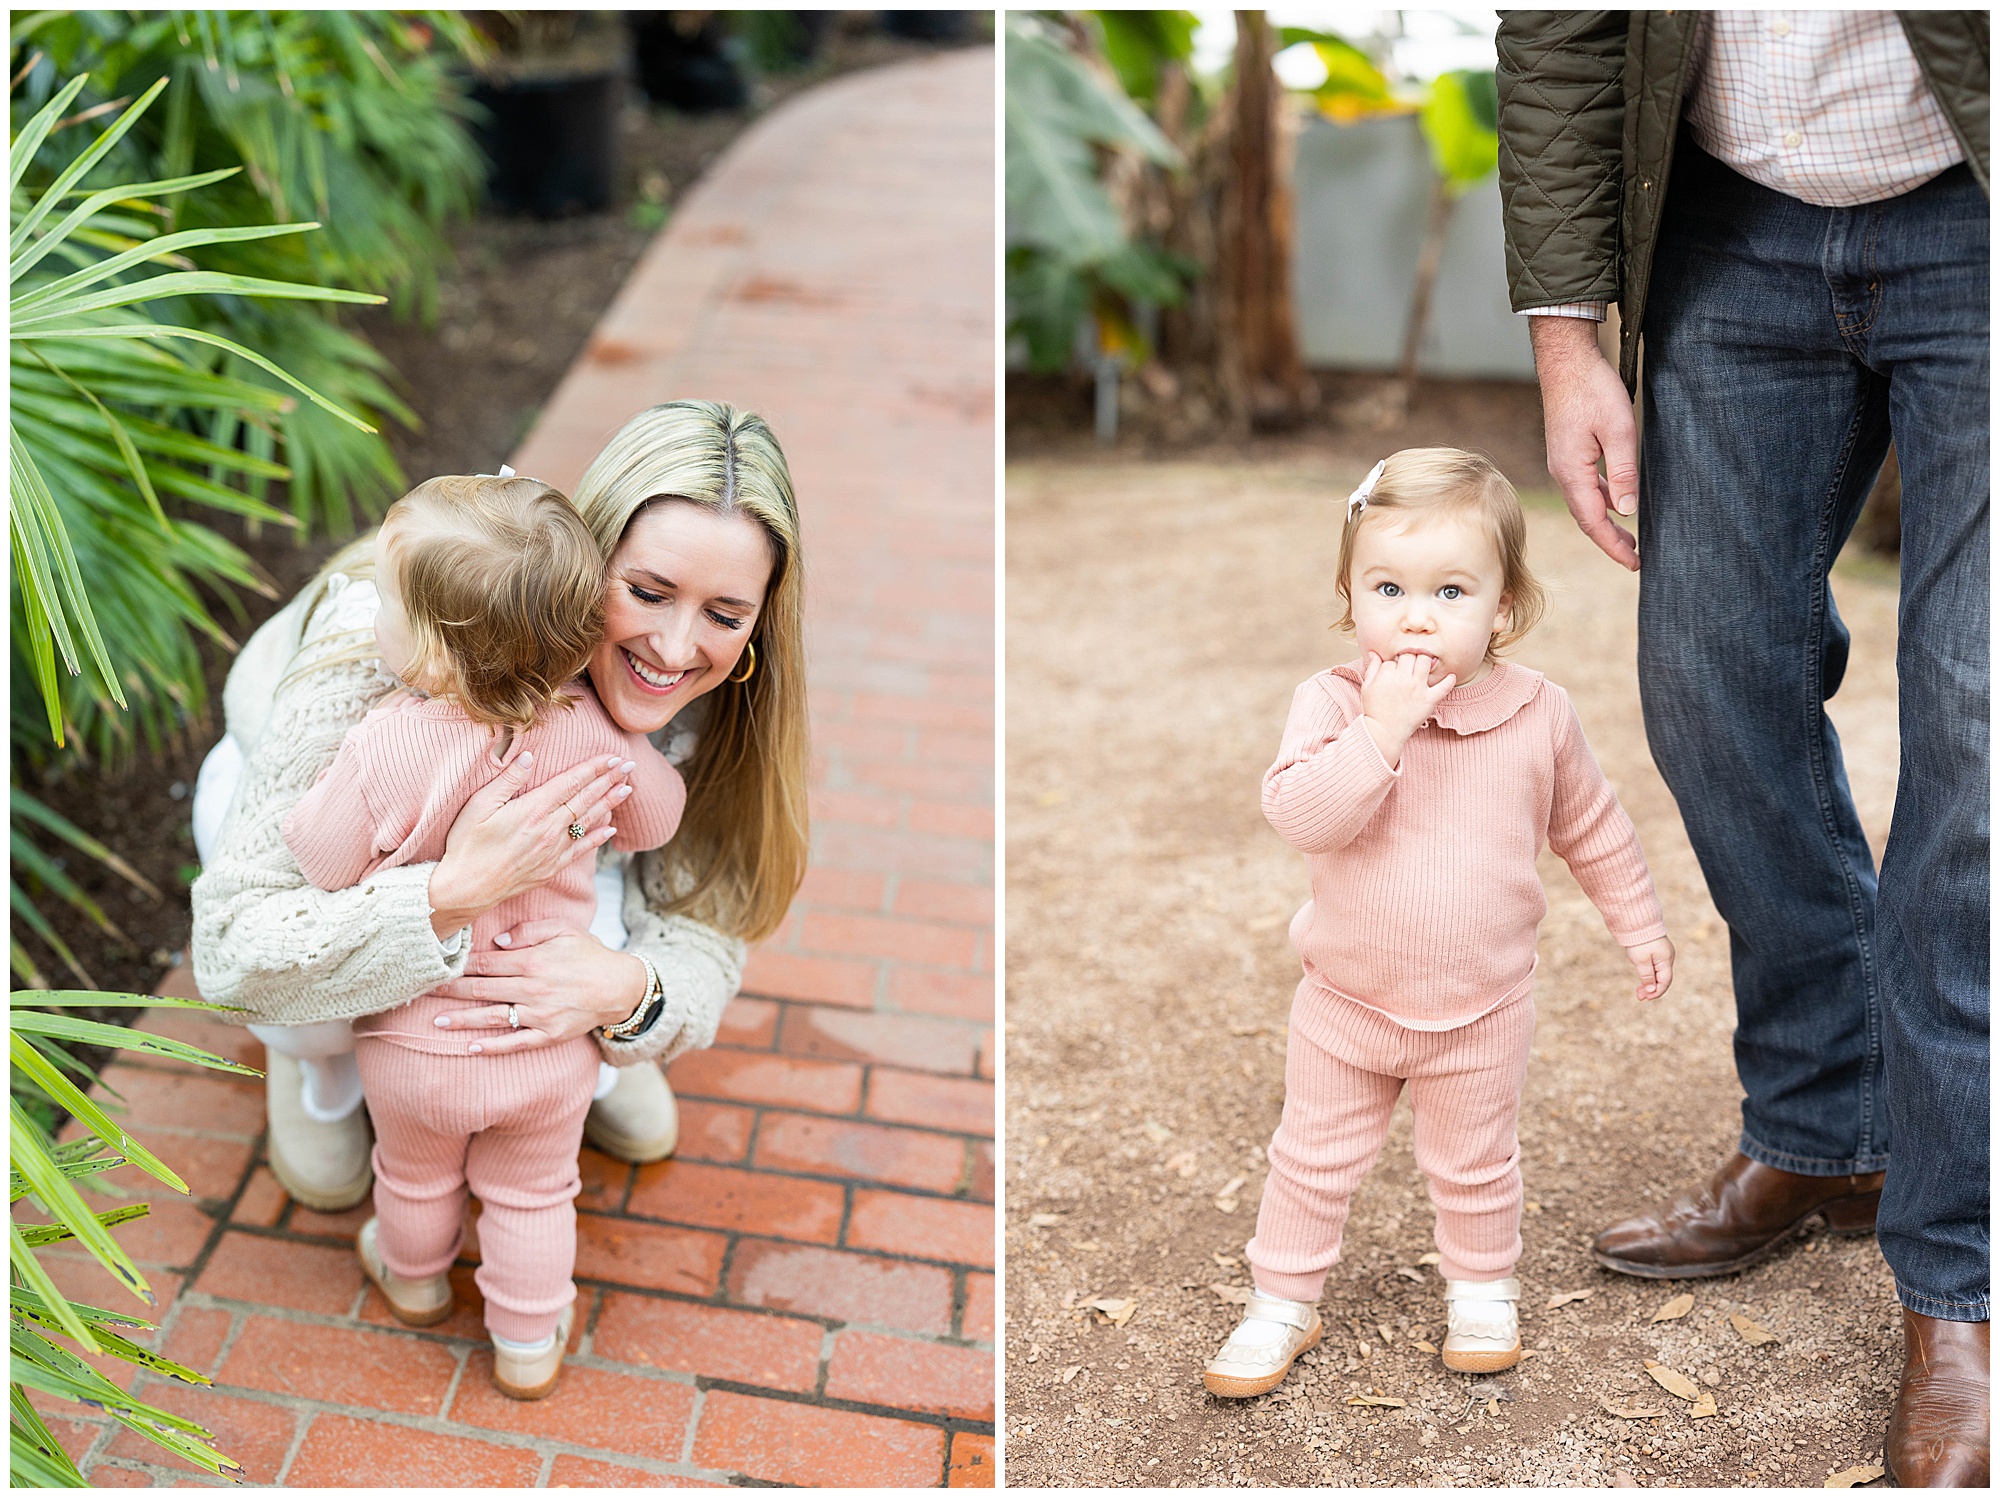 Eleanor Stenner Photography - a Birmingham, AL wedding photographer - photographs the Freemans in her Valentine's Day Mini Sessions